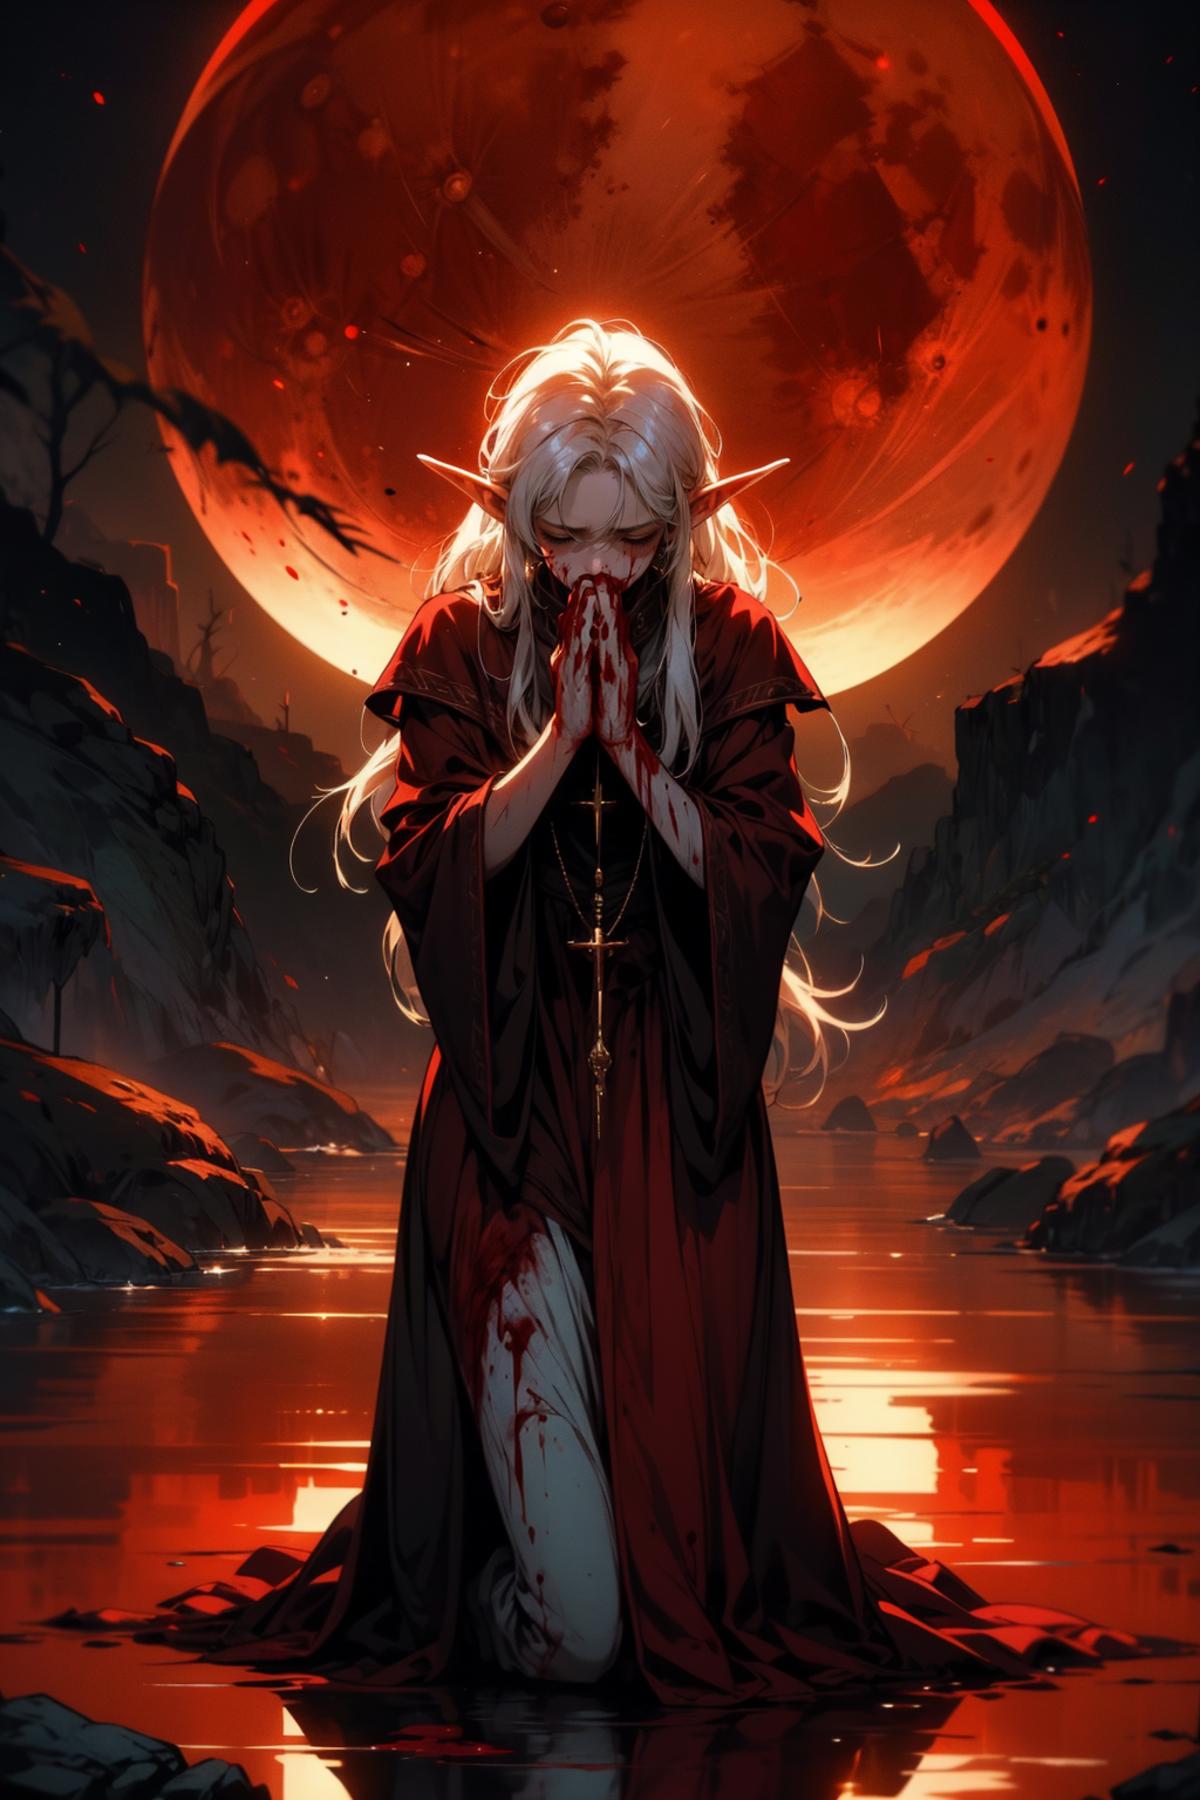 A painting of a woman with long blonde hair praying in front of a moon.